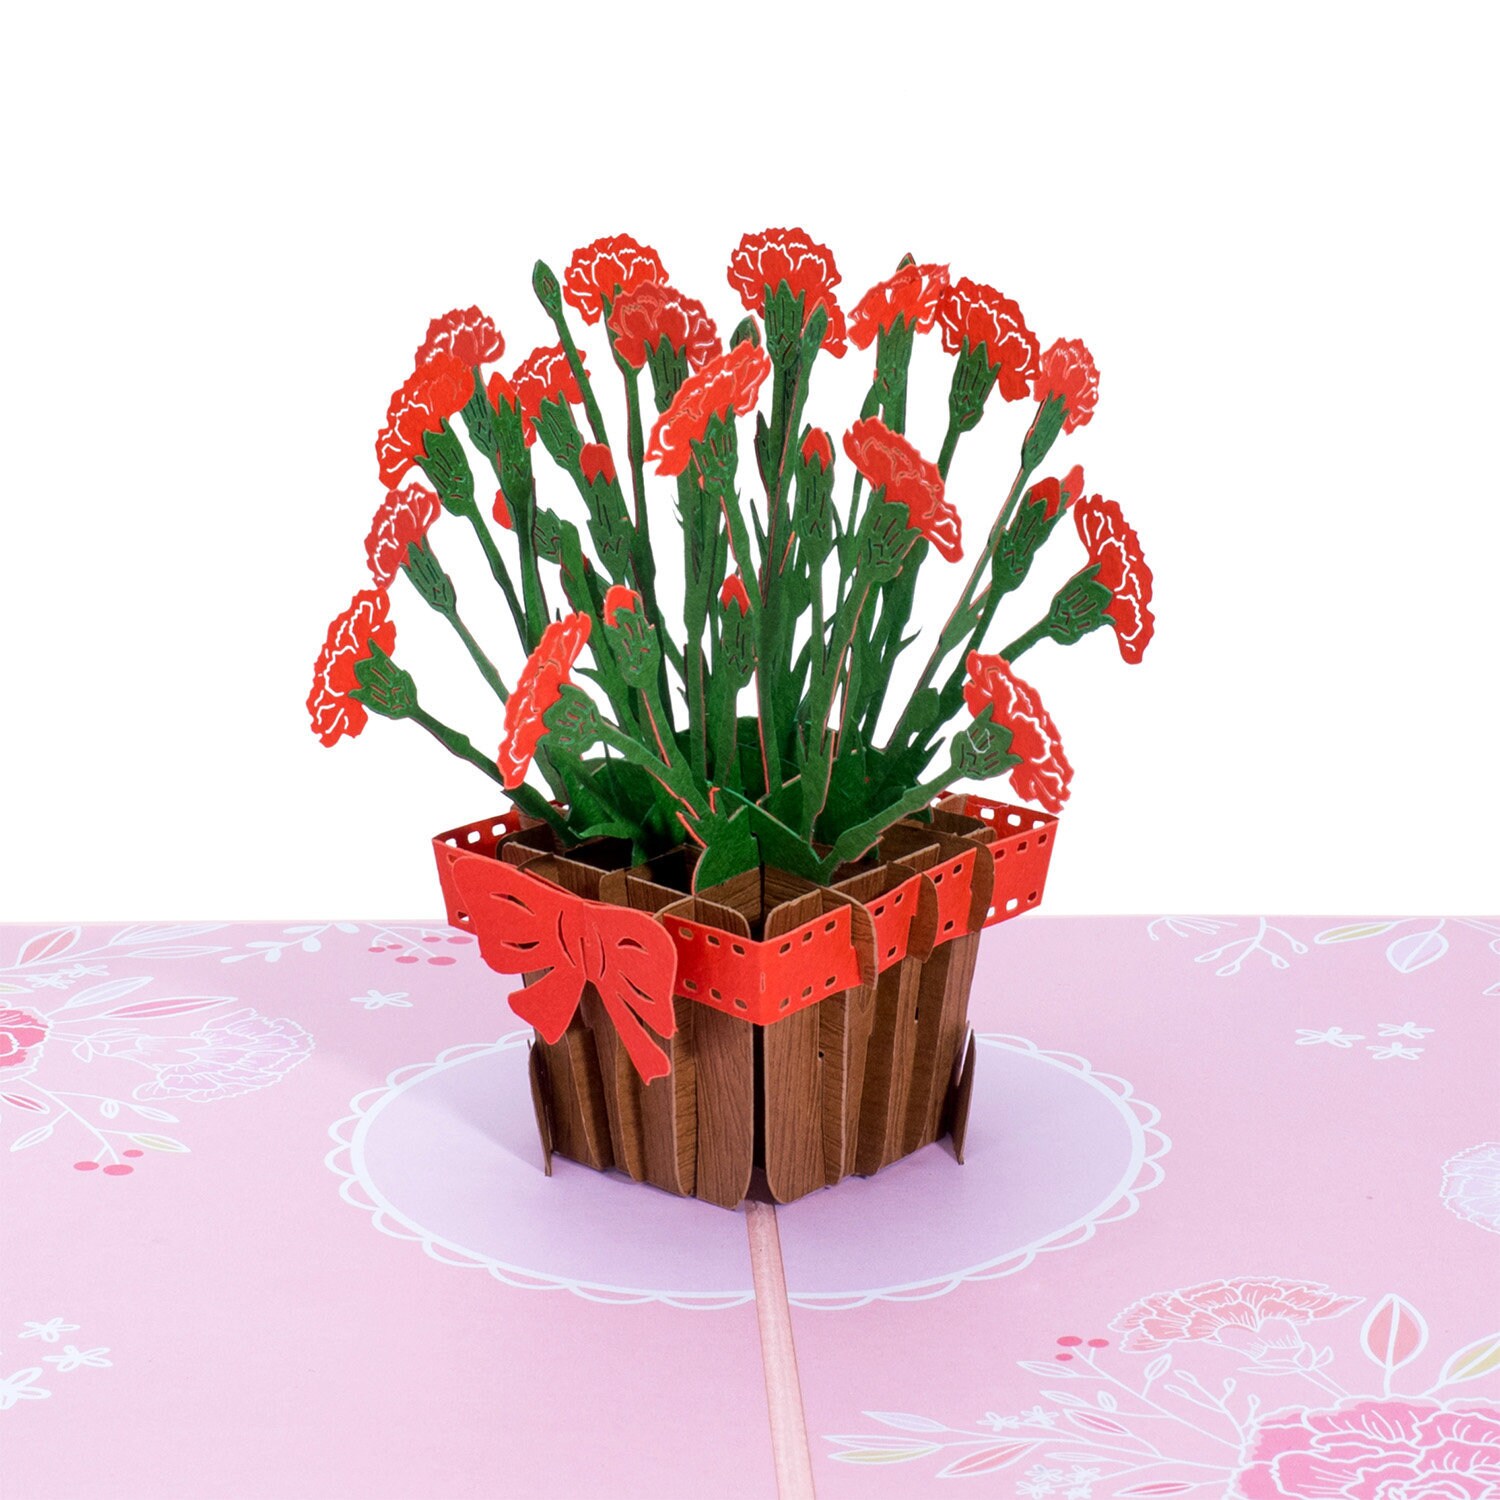 3D Pop-Up Carnation Greeting Card for Birthday Mothers Father's Day Wedding